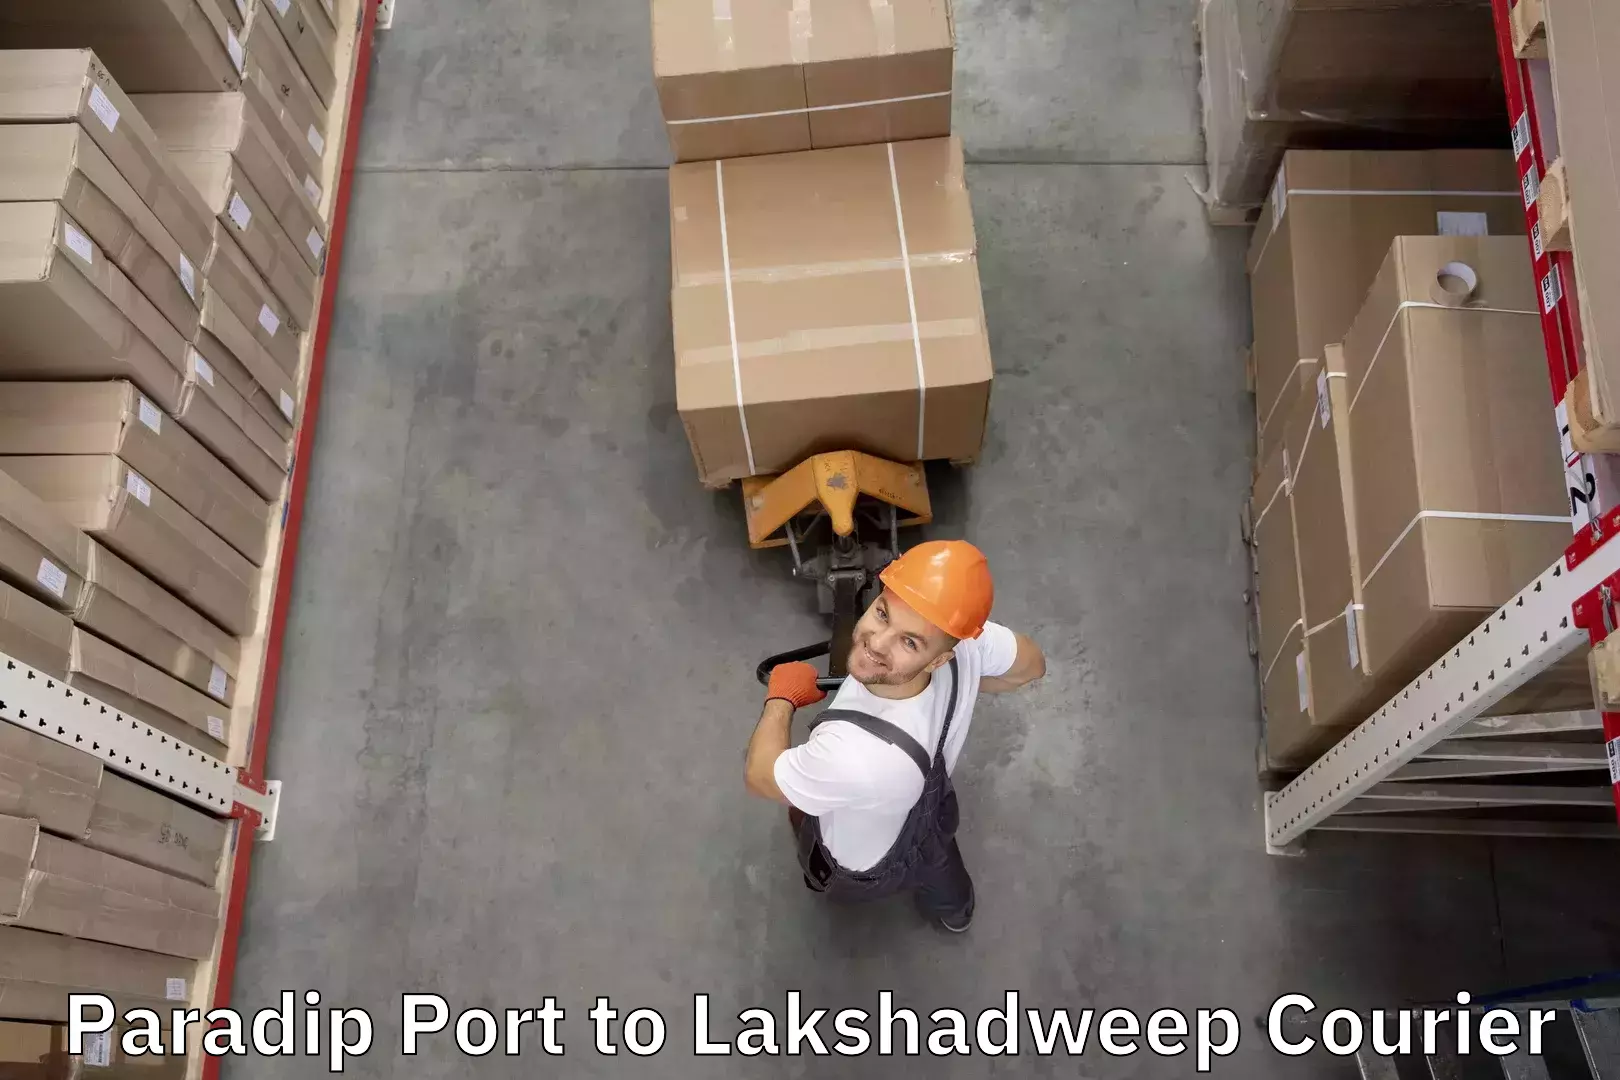 Luggage delivery news Paradip Port to Lakshadweep